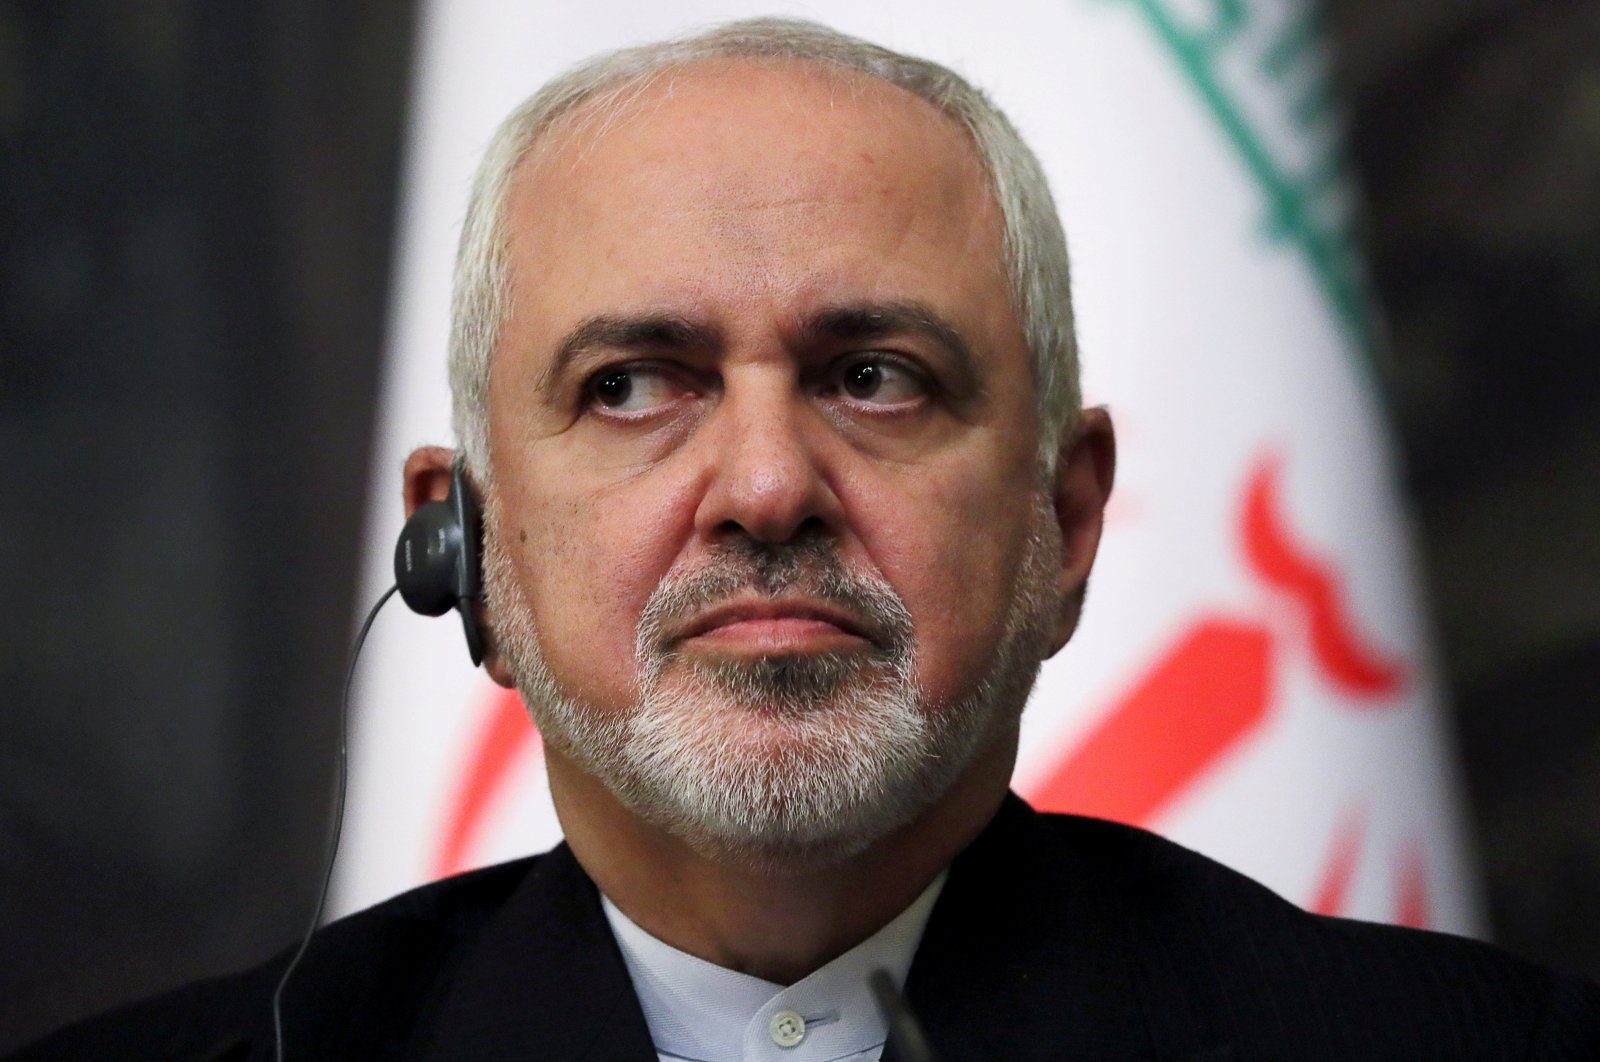 Iranian Foreign Minister Mohammad Javad Zarif attend a news conference in Moscow, Russia, May 8, 2019. (REUTERS)